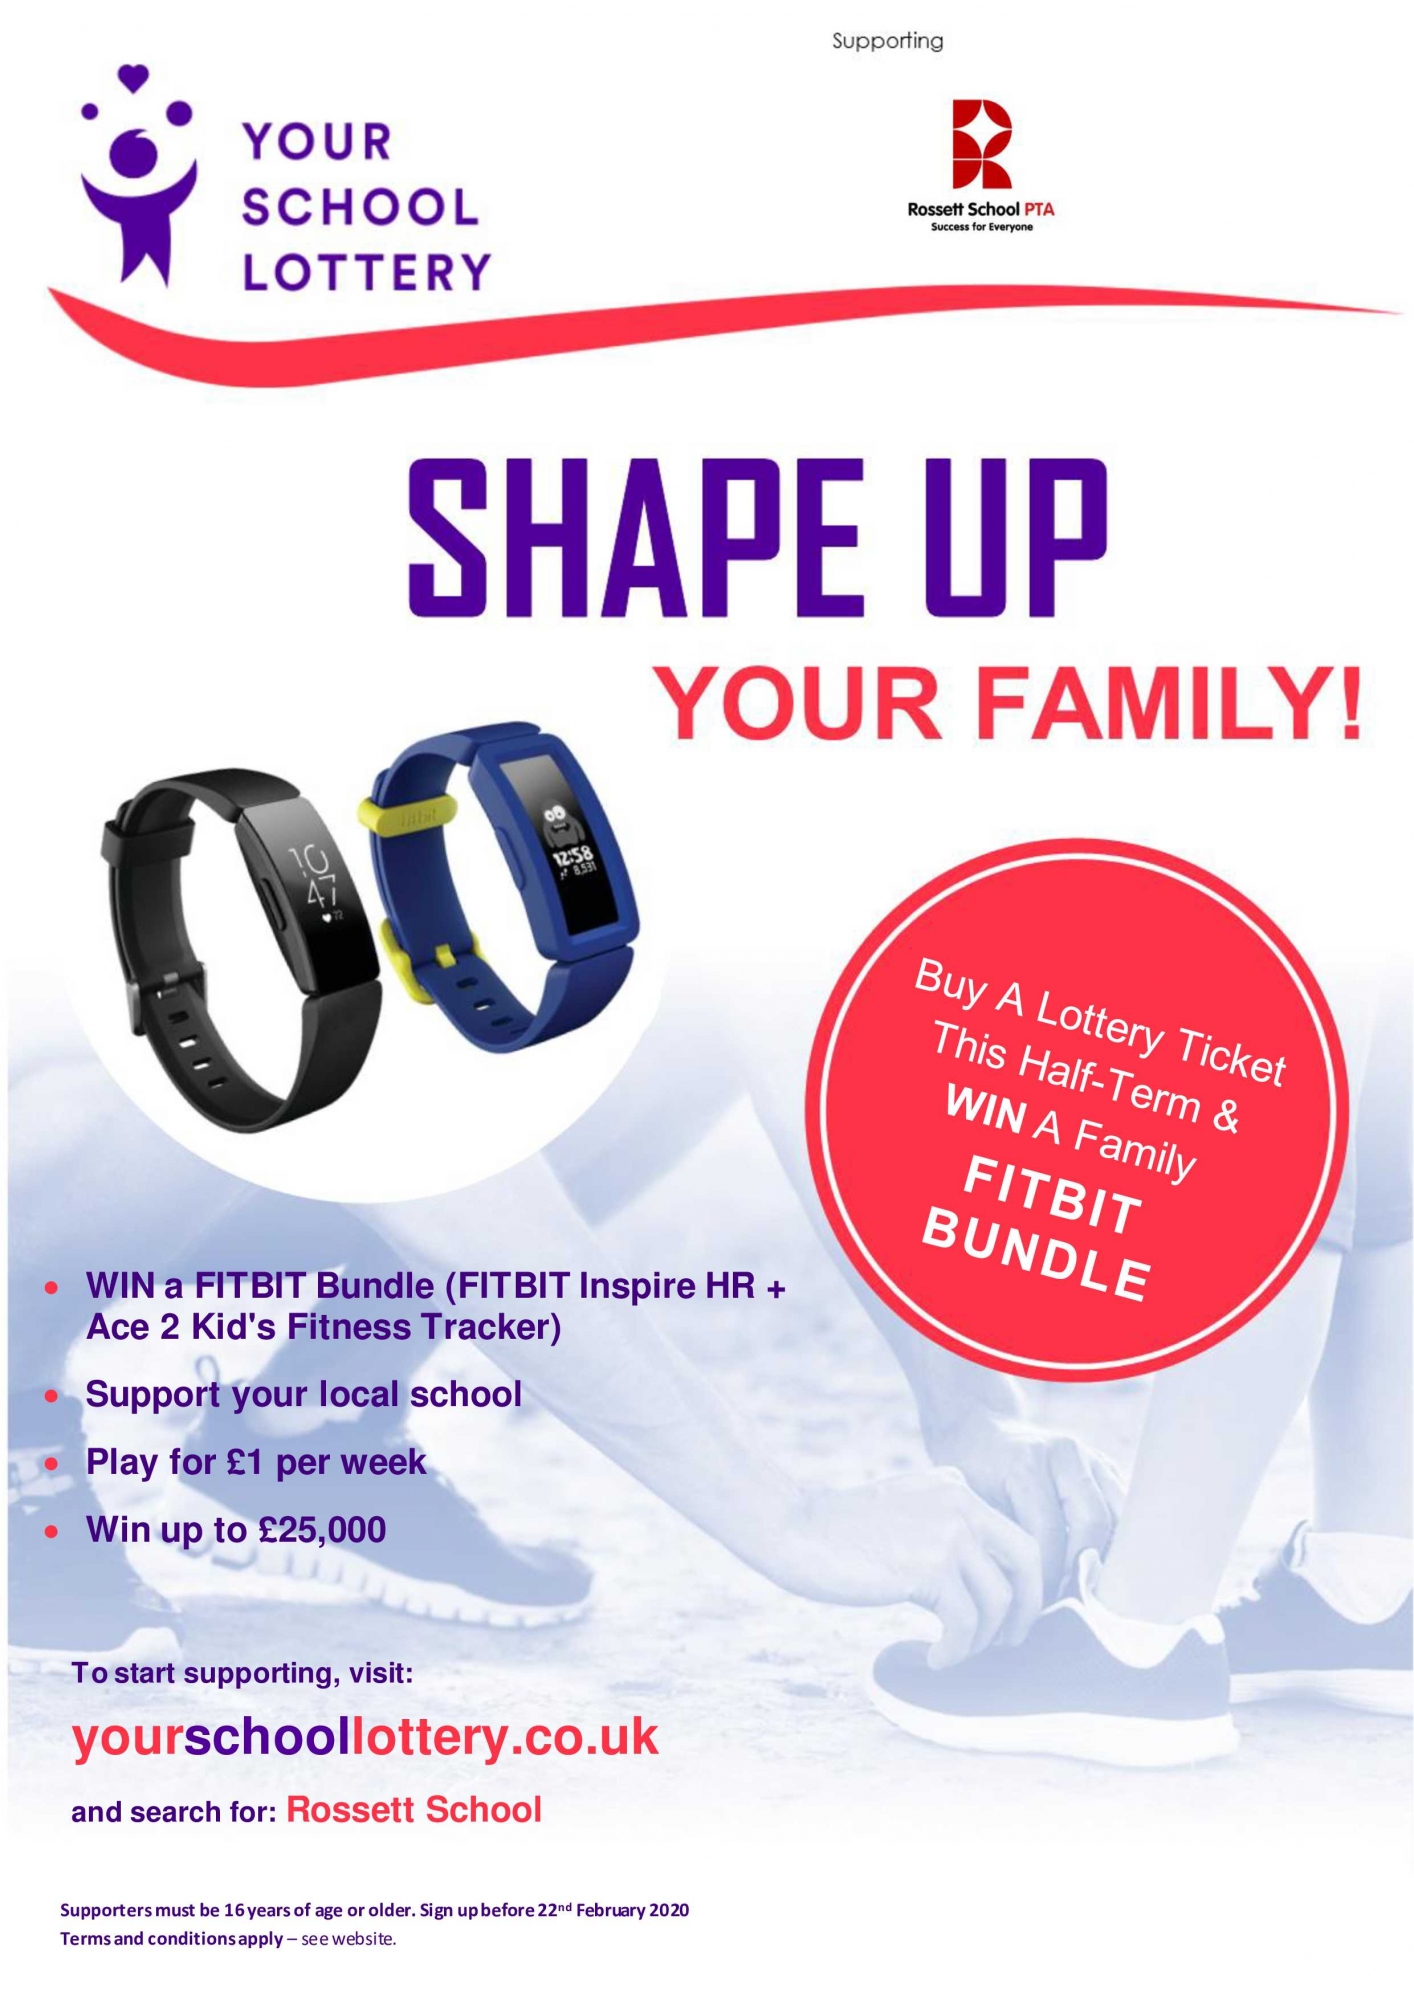 family-fitbit-offer-2020 - image